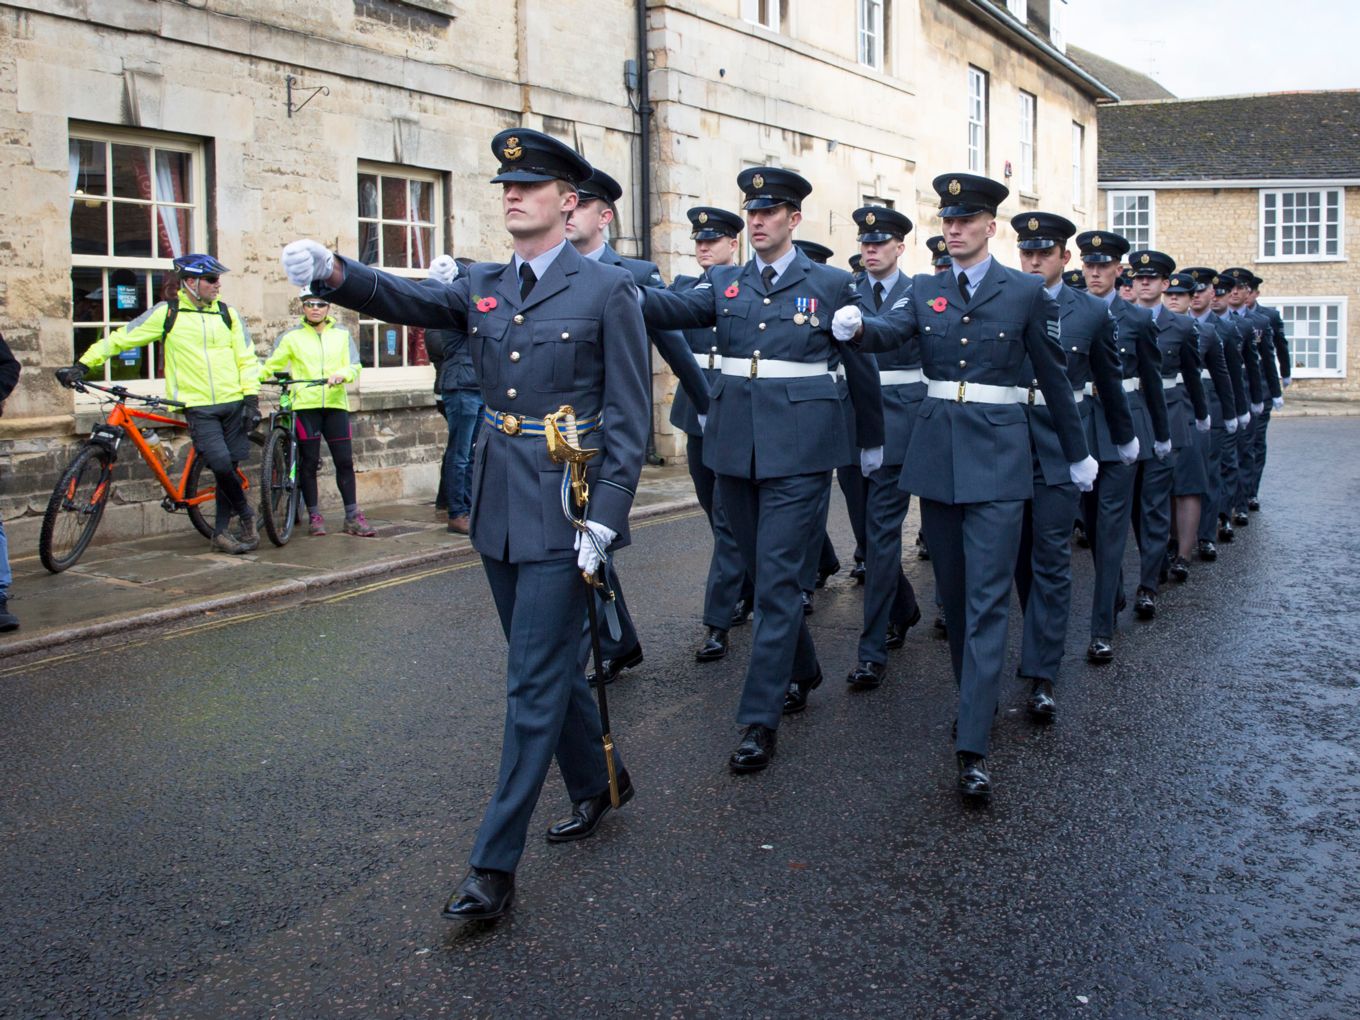 Wittering’s parade in Stamford